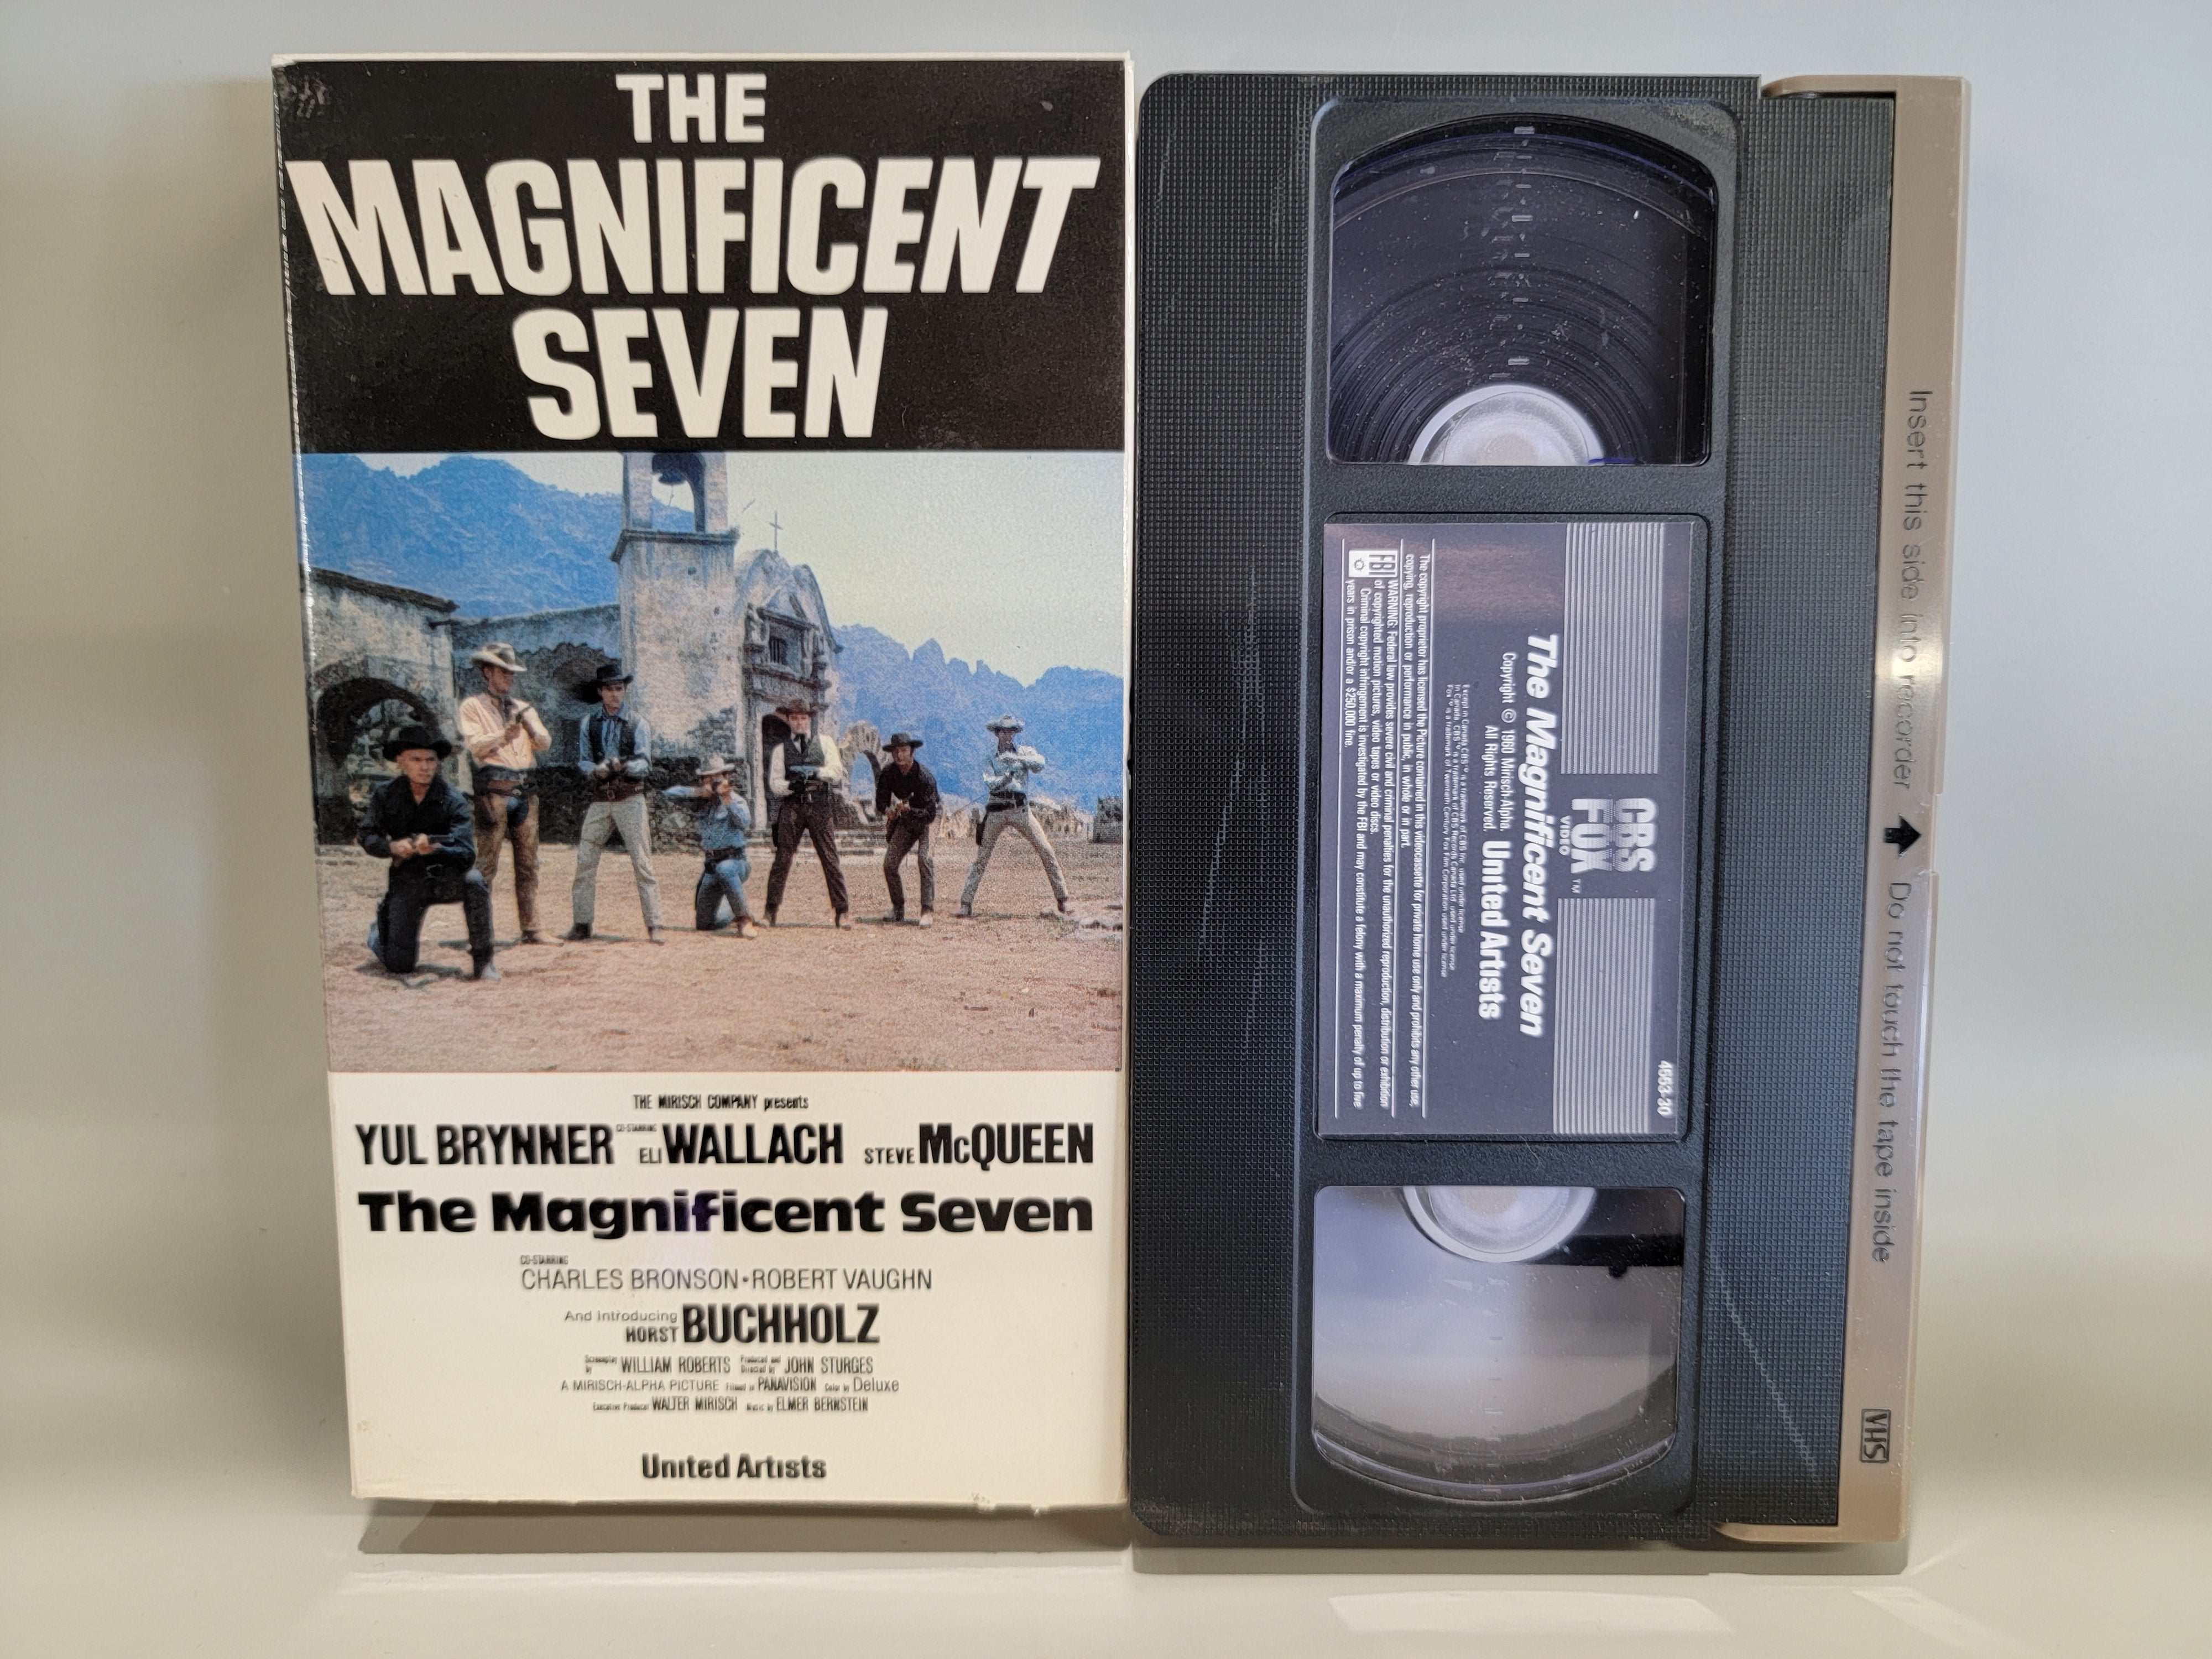 THE MAGNIFICENT SEVEN VHS [USED]